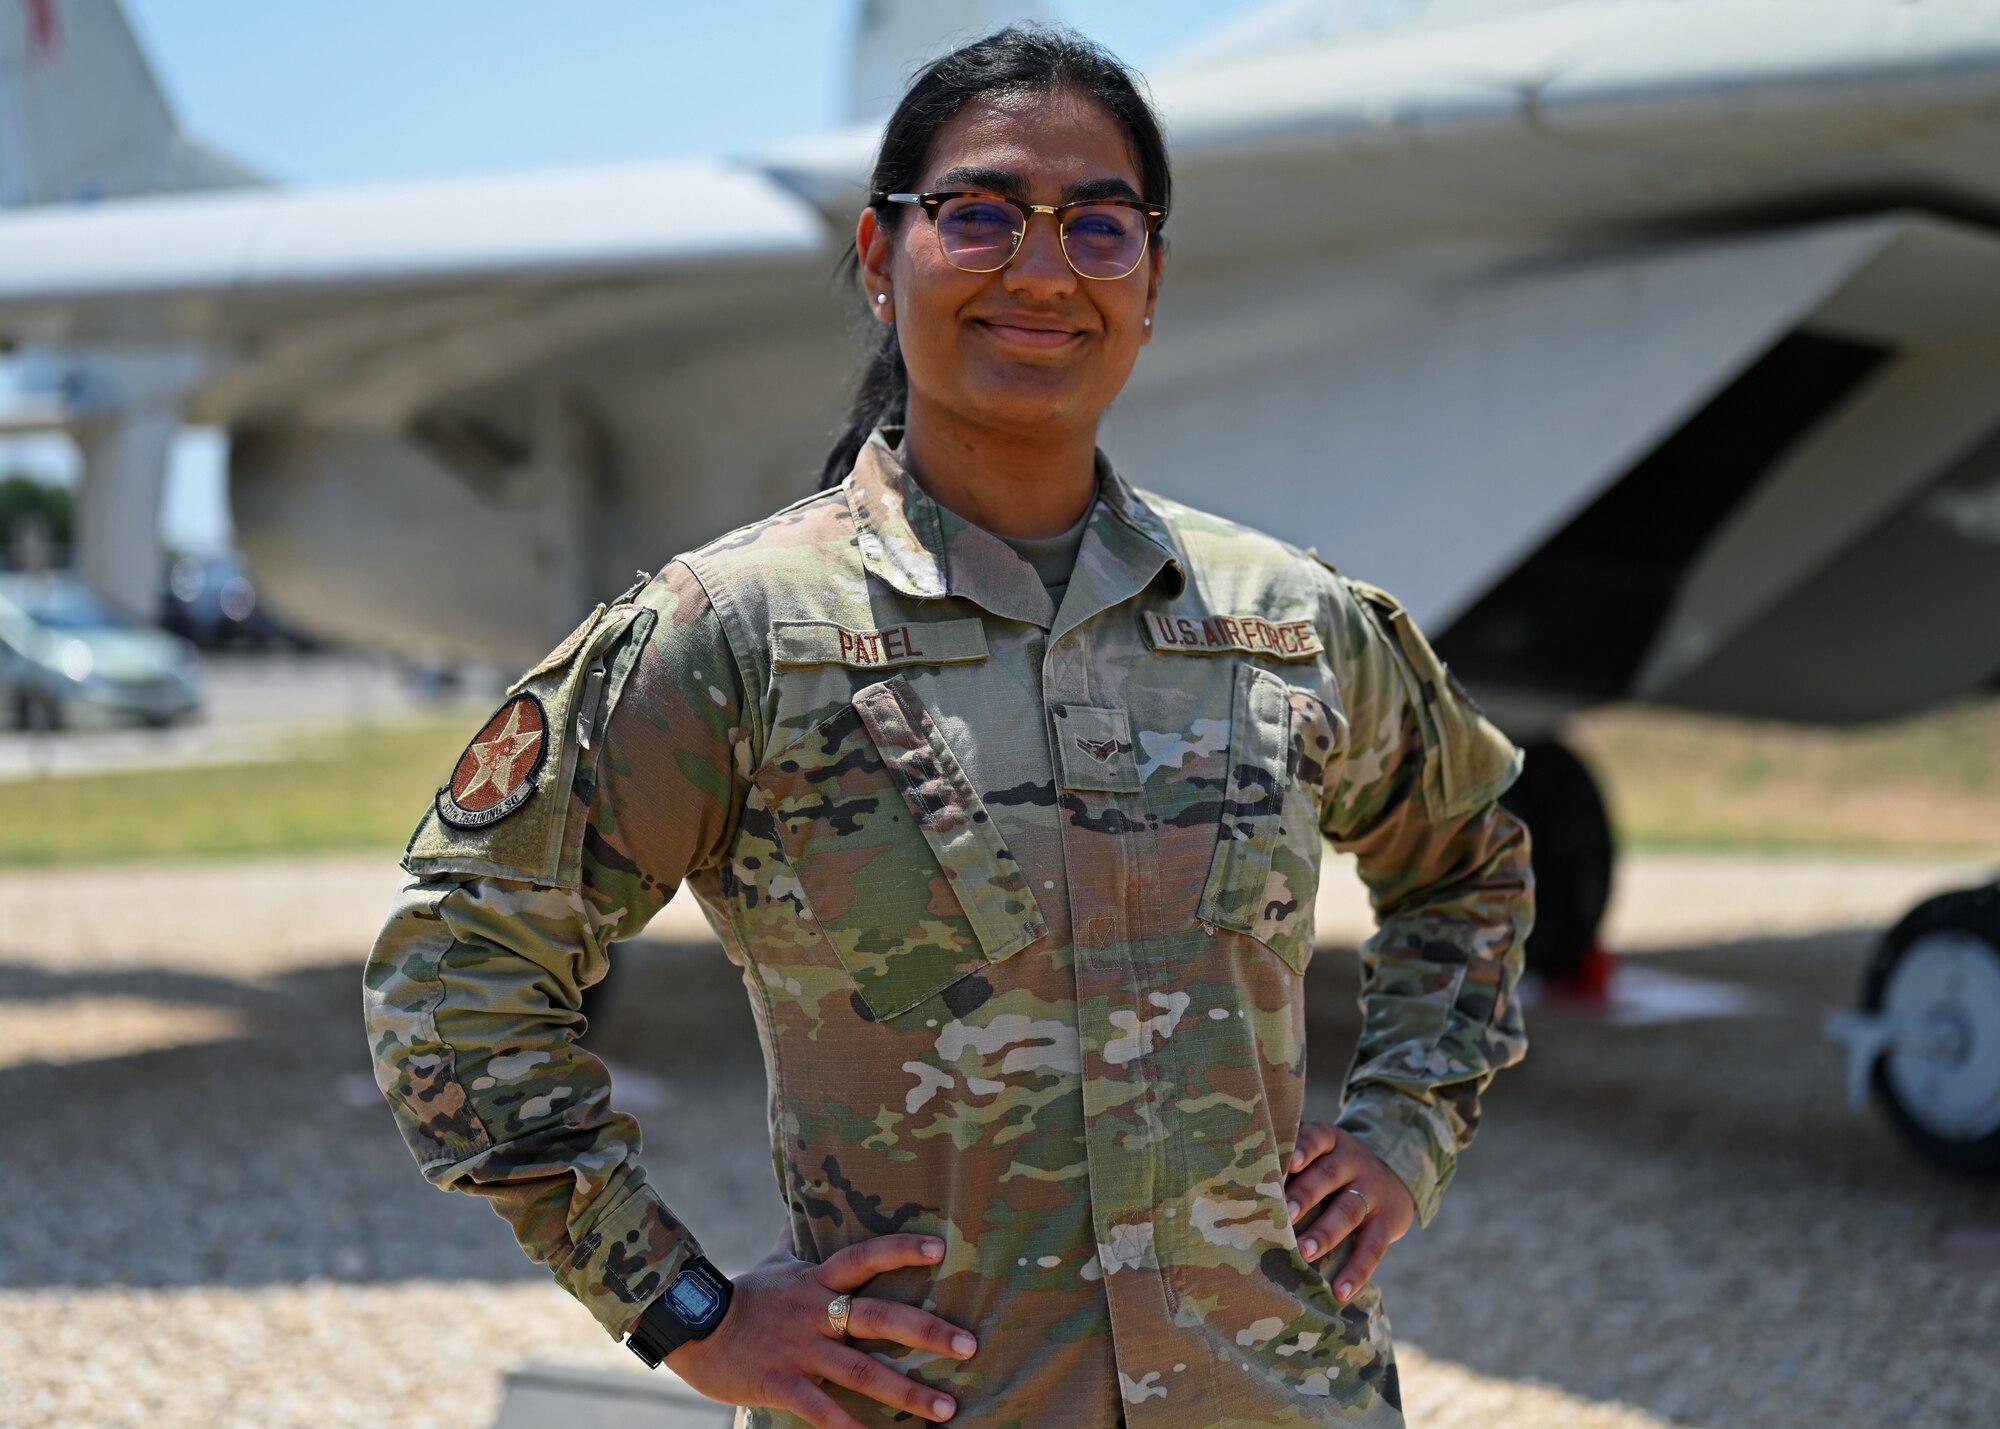 U.S. Air Force Airman 1st Class Shivangi Patel, 316th Training Squadron Russian linguist student, poses in front of a MiG-29 Fulcrum A aircraft configuration trainer at Goodfellow Air Force Base, Texas, May 19, 2022. Patel joined to learn language skills at the world’s premiere language learning facility. (U.S. Air Force photo by Senior Airman Ethan Sherwood)